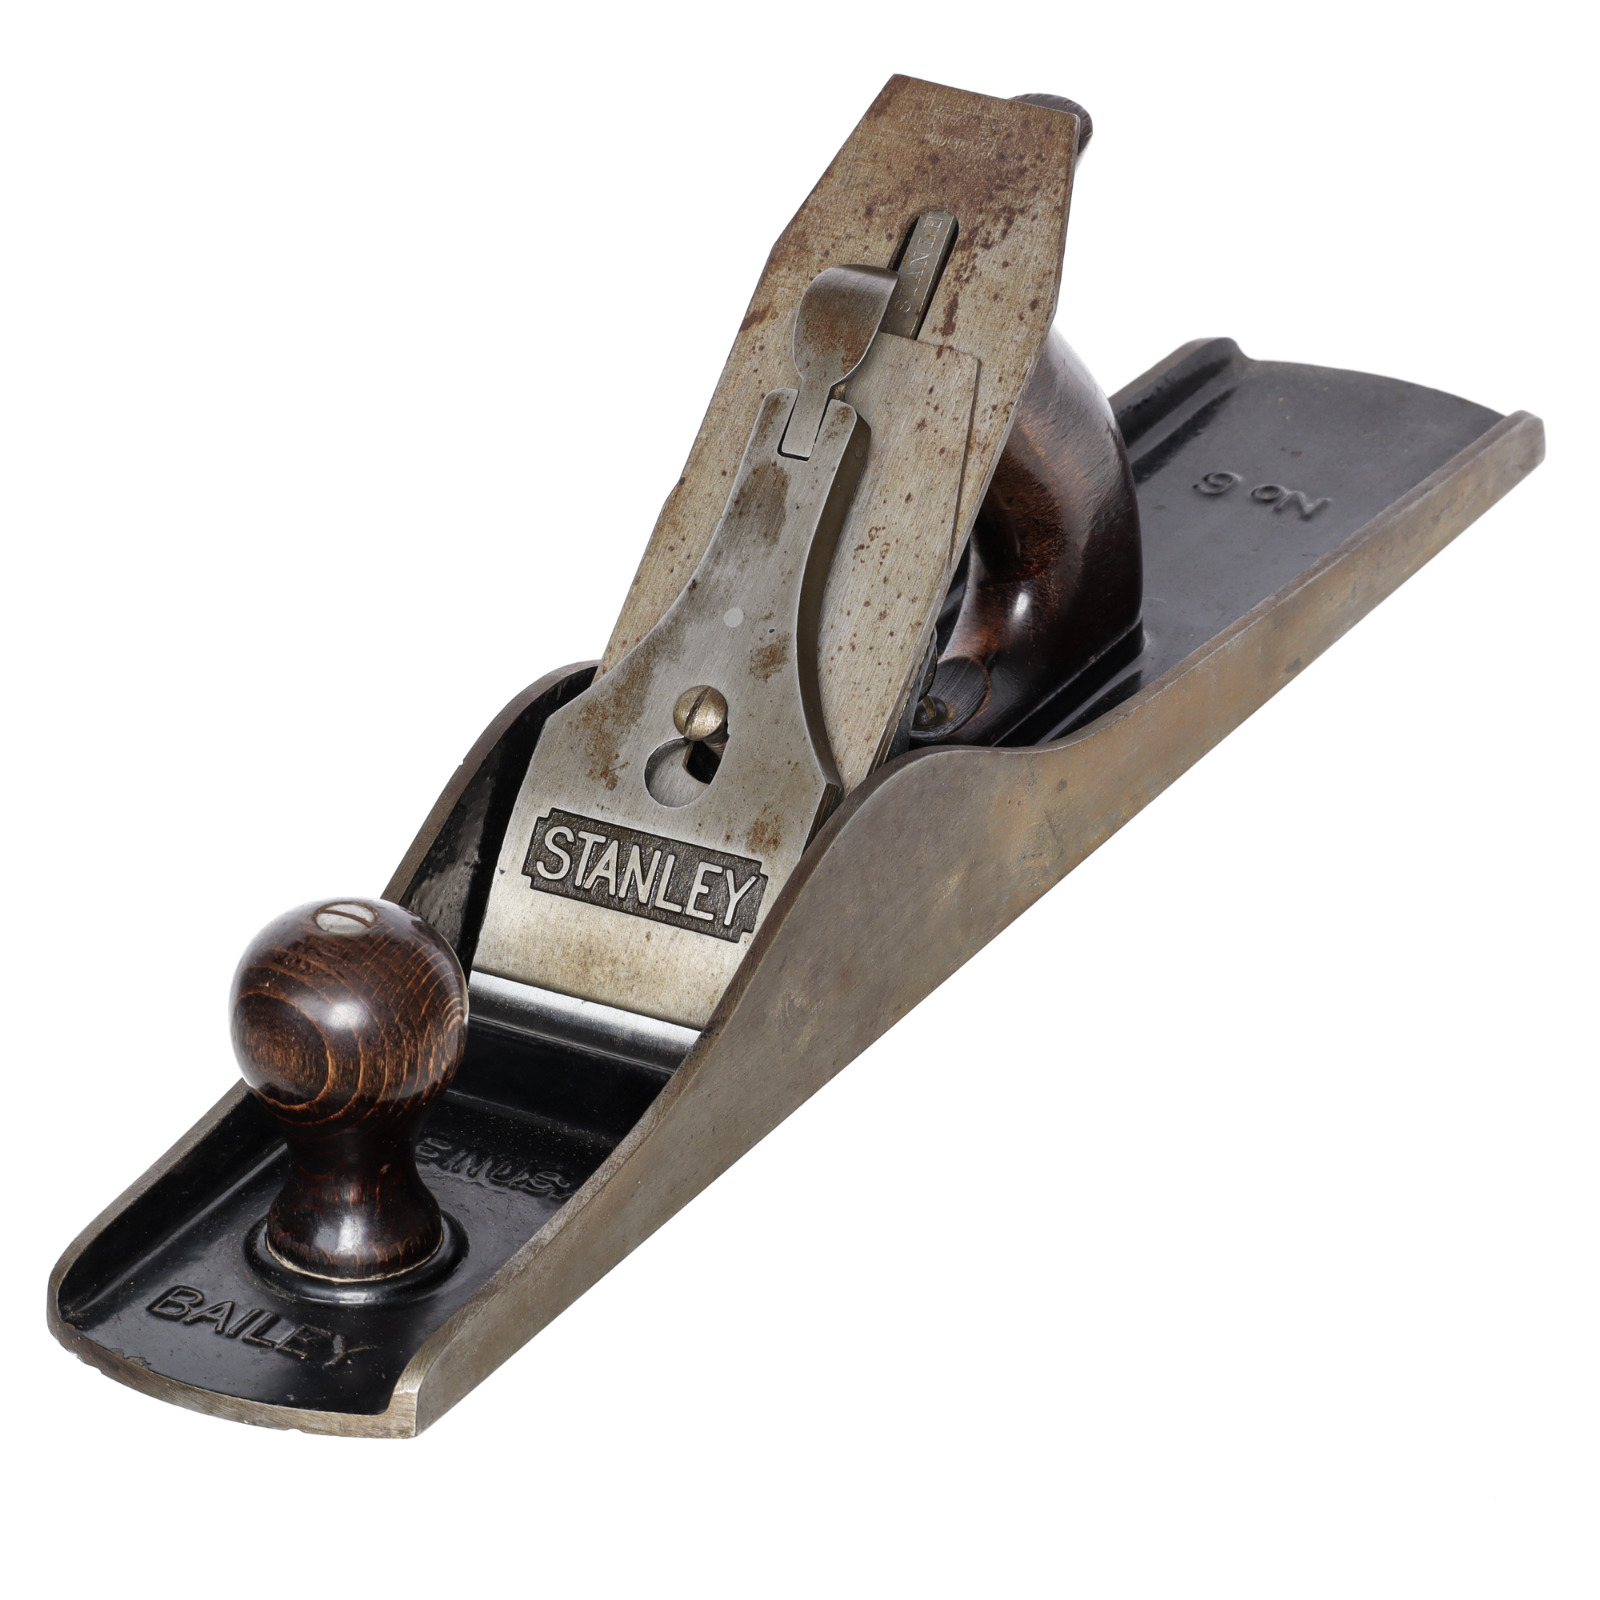 Stanley No. 6 Type 17 (1942-1945) Fore Plane